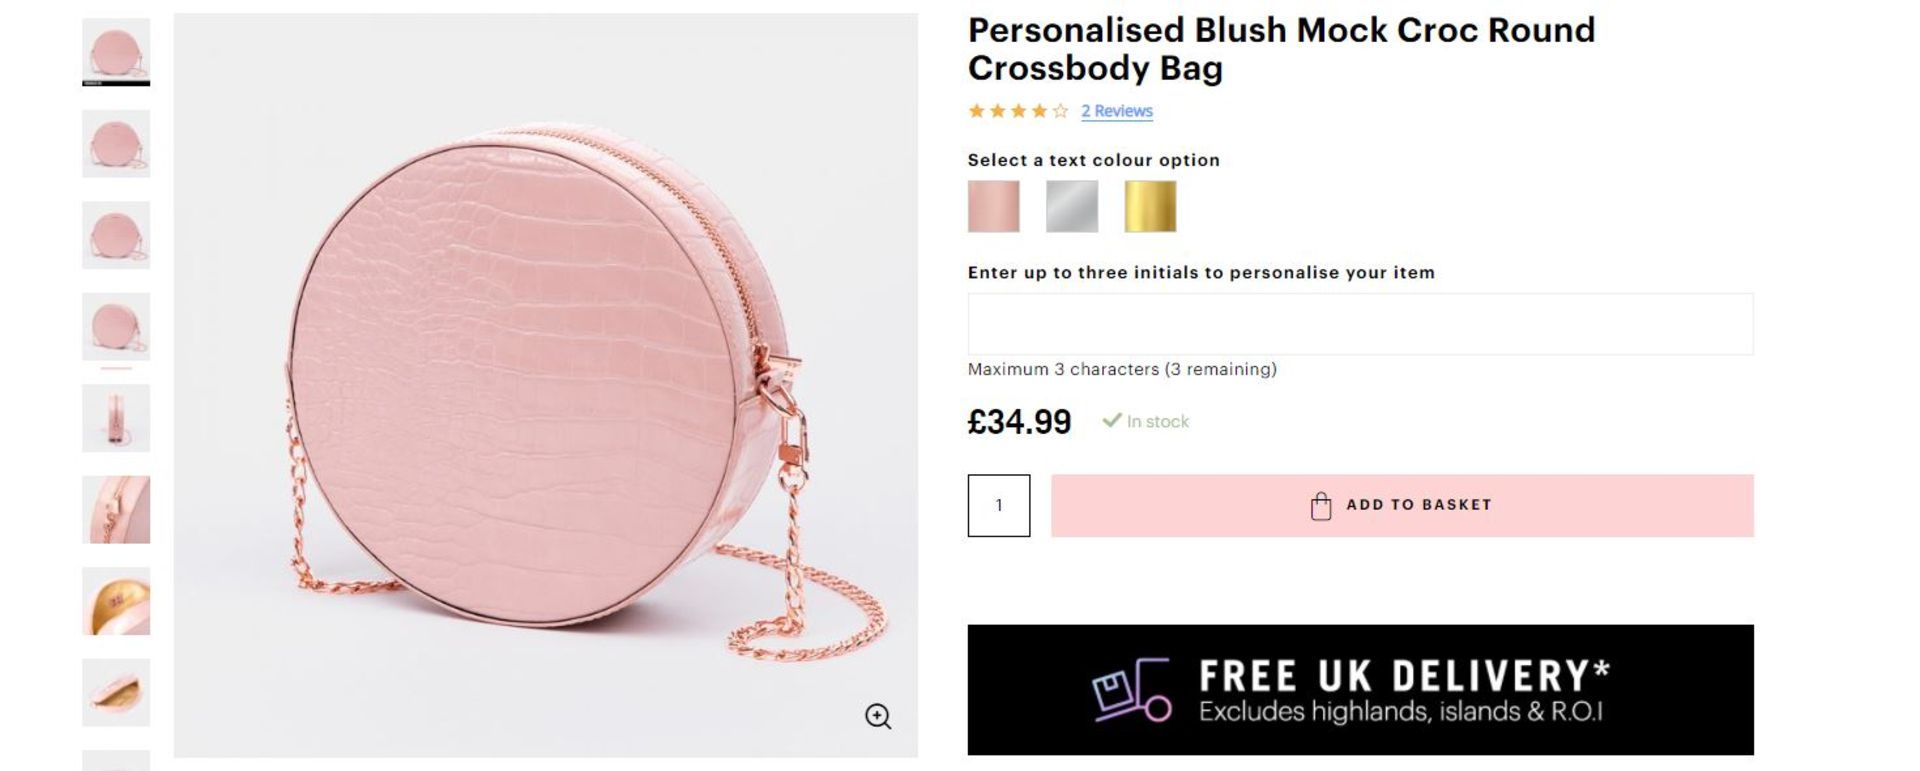 3 x NEW BOXED Beauti Mock Croc Round Crossbody Luxury Bag -Blush. RRP £34.99 each. NOTE: ITEM IS NOT - Image 2 of 2